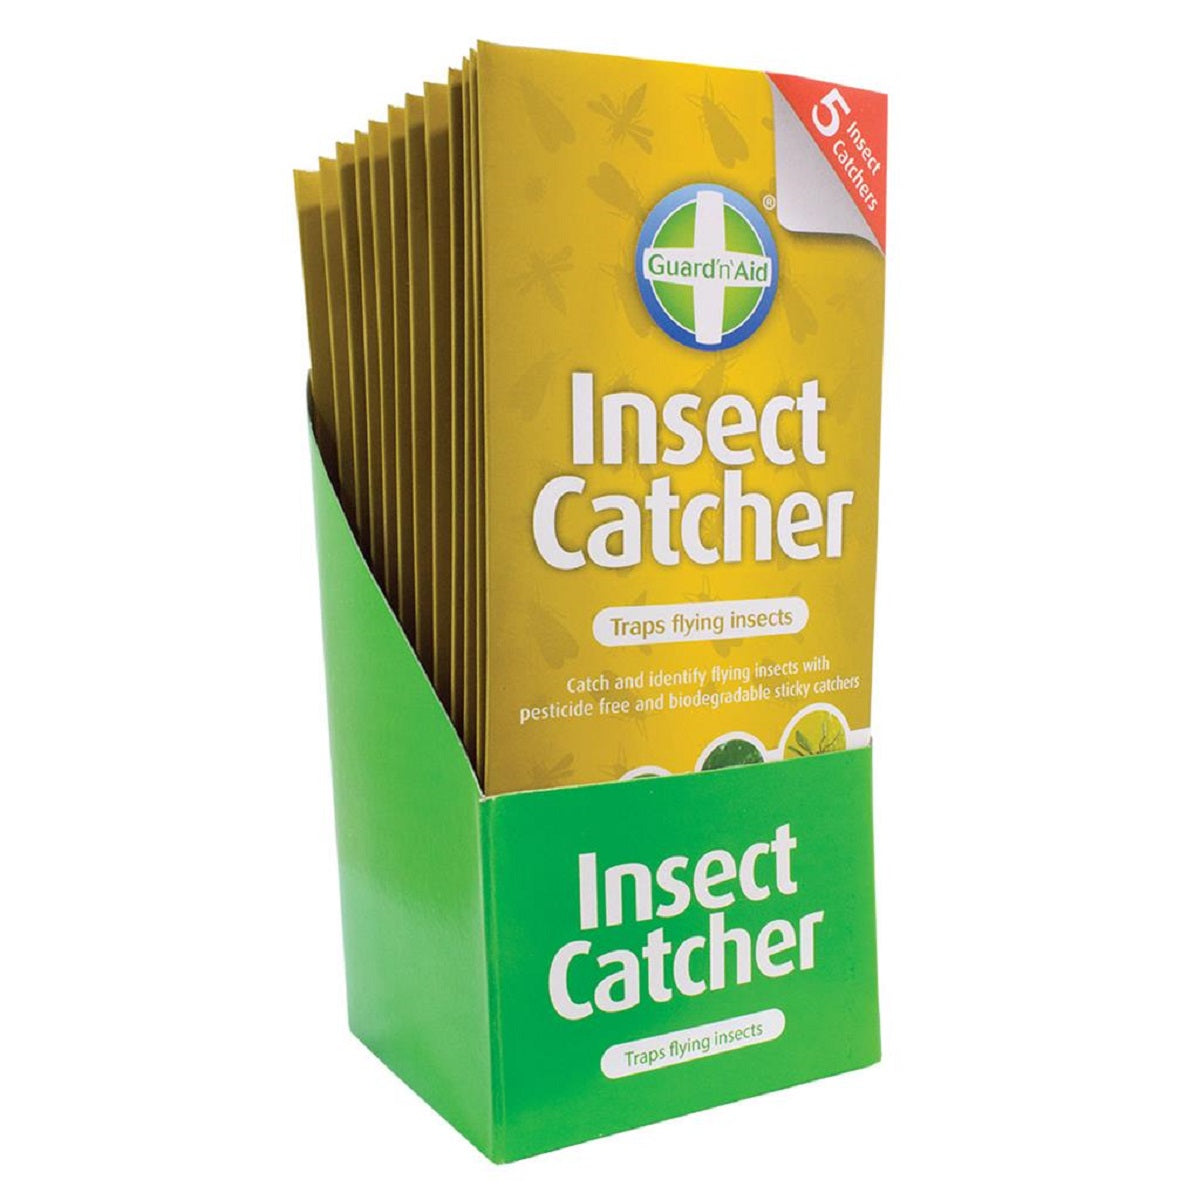 Guard'n'Aid Insect Catcher - Yellow glue trap